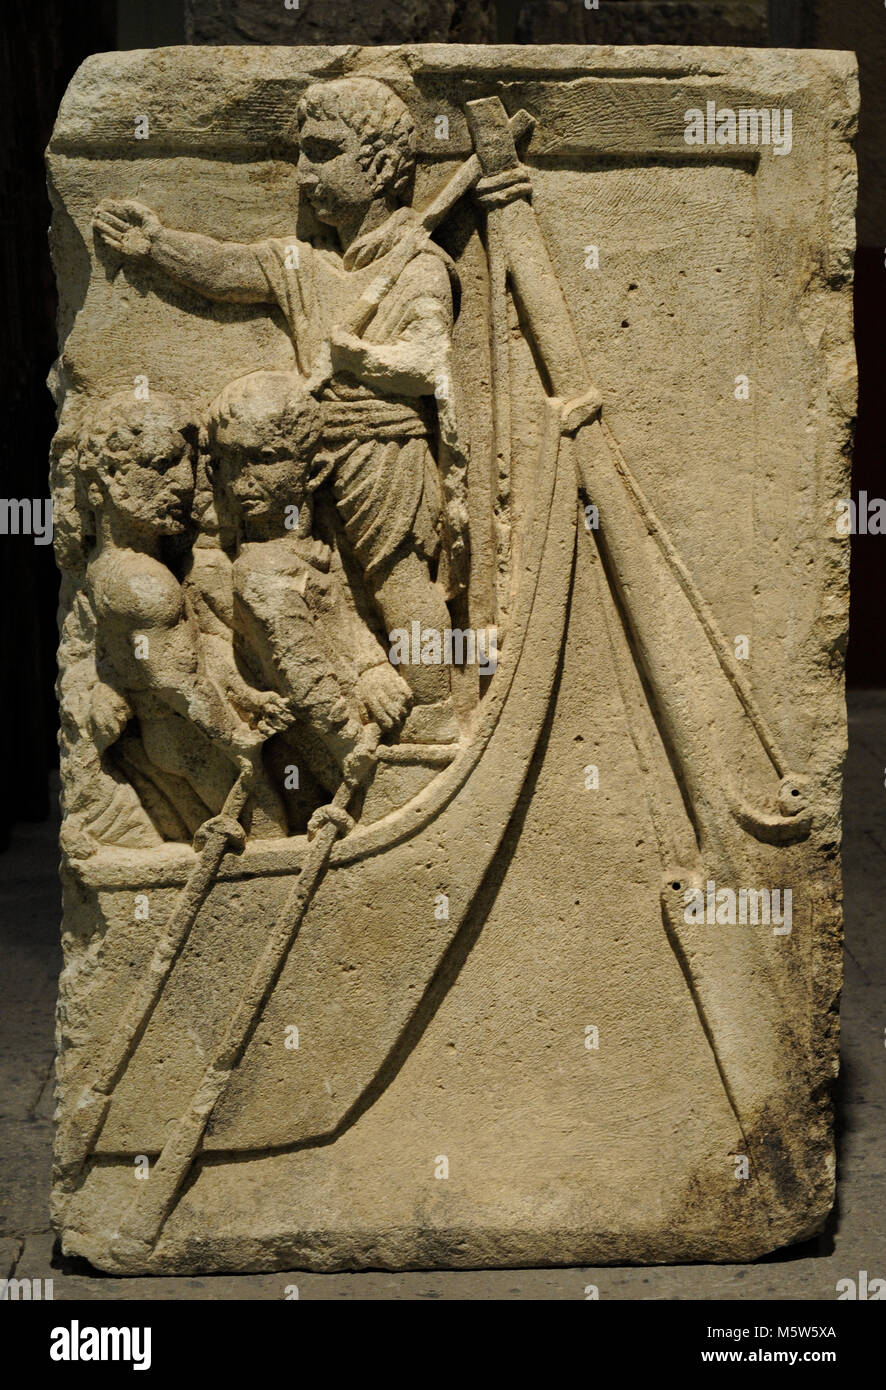 Fragment of a funerary relief. Stern of a ship with the helmsman and the rowers, who by their appearance seems to be barbarians. End of the 1st century. From Cologne, Germany. Roman-Germanic Museum. Cologne. Germany. Stock Photo